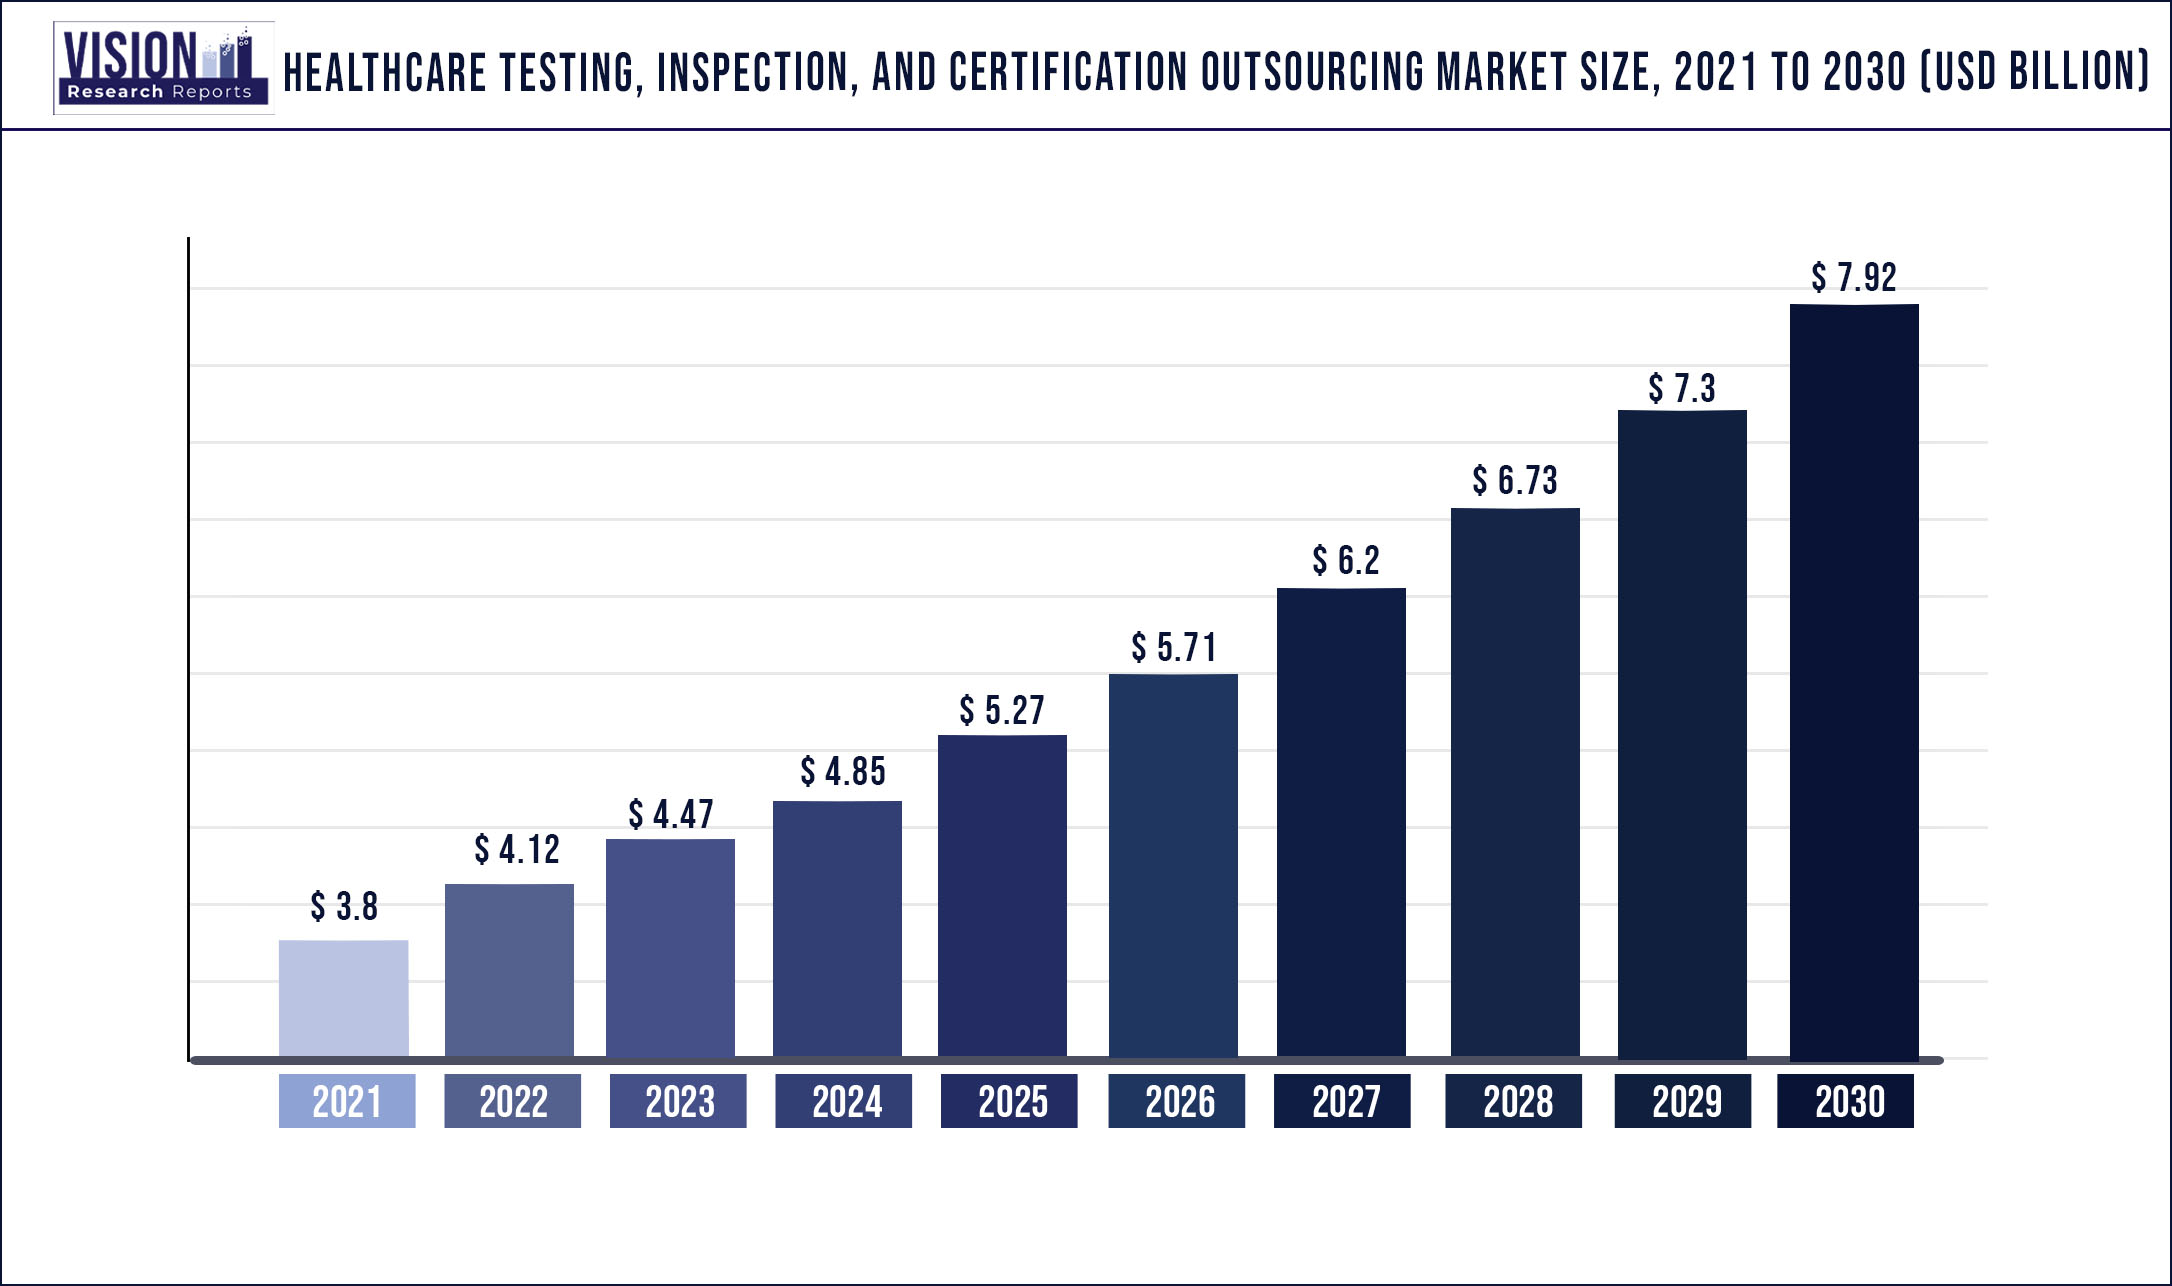 Healthcare Testing, Inspection, And Certification Outsourcing Market Size 2021 to 2030